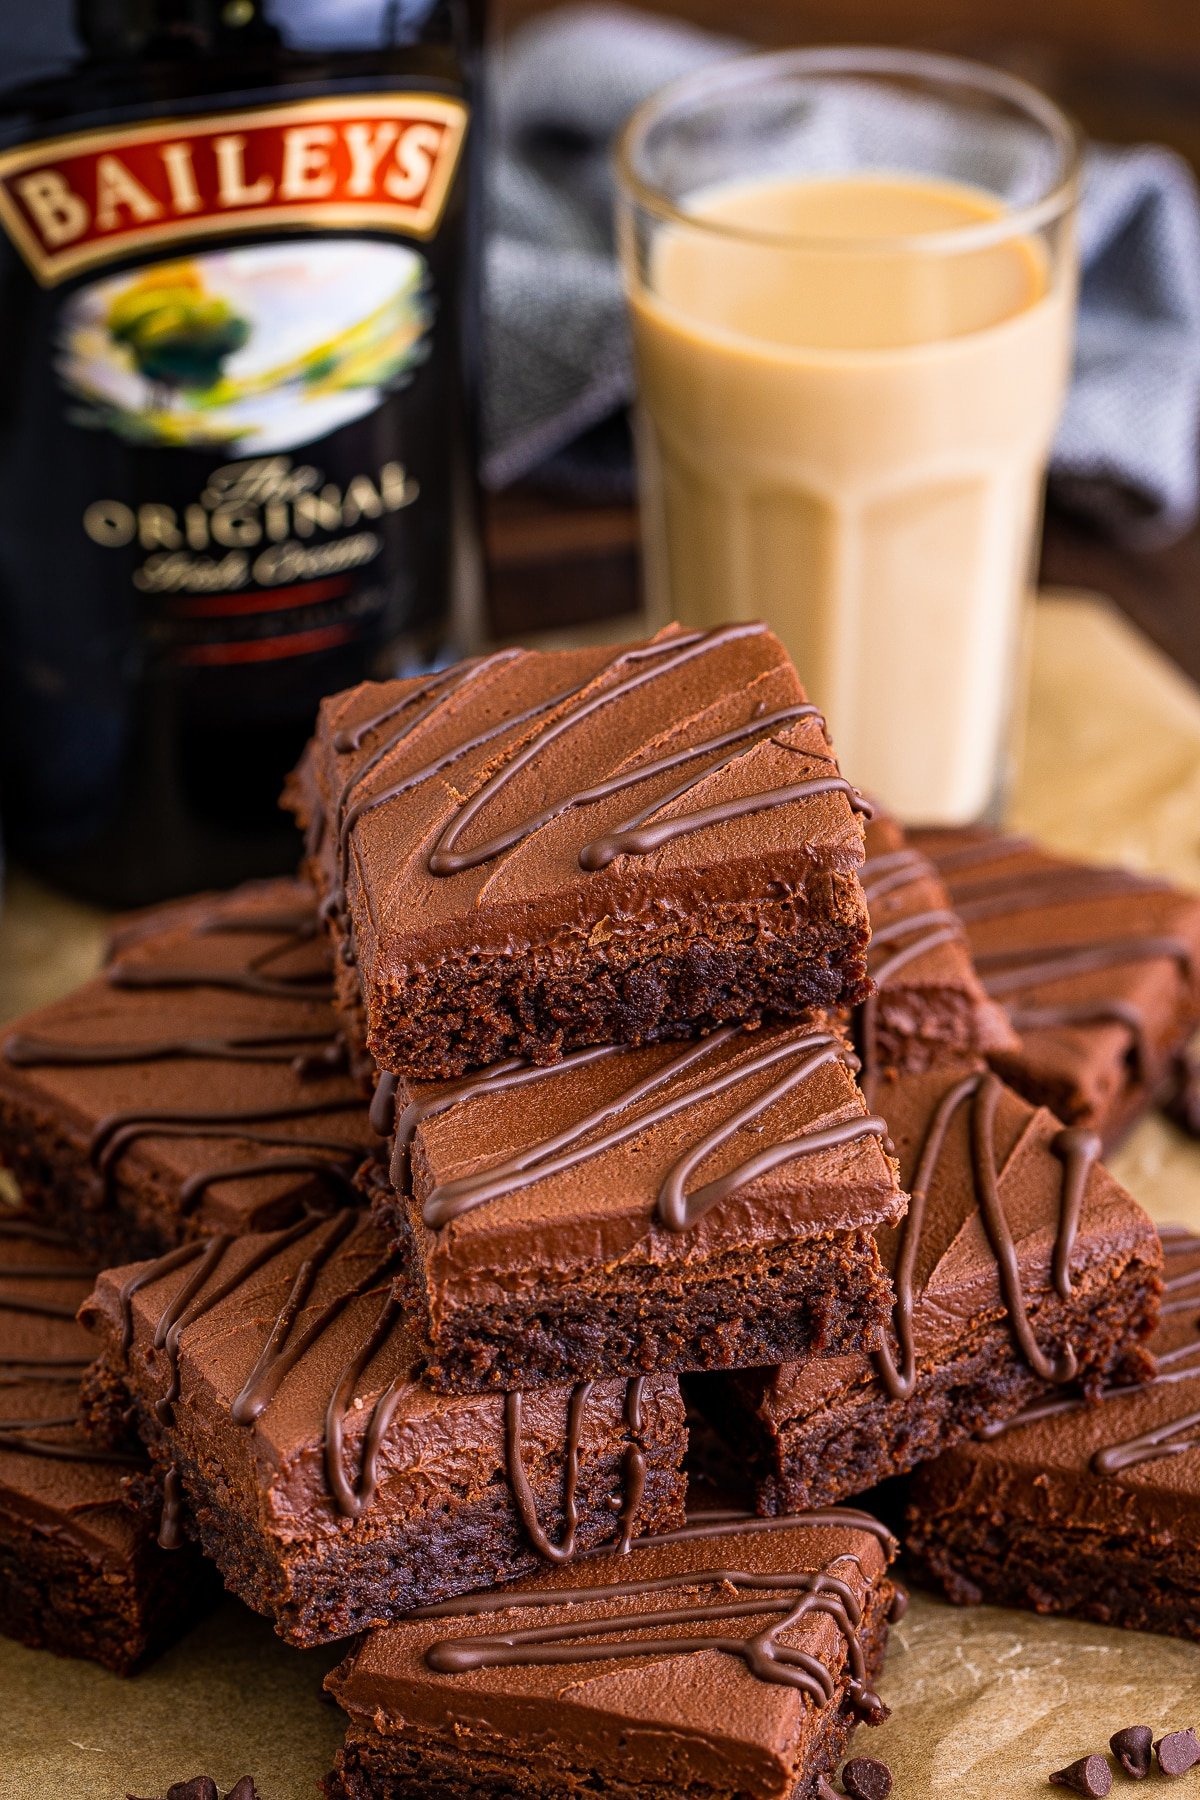 Bailey's Brownies stacked on brown parchment paper, a glass of Irish Cream and alcohol bottle in the background